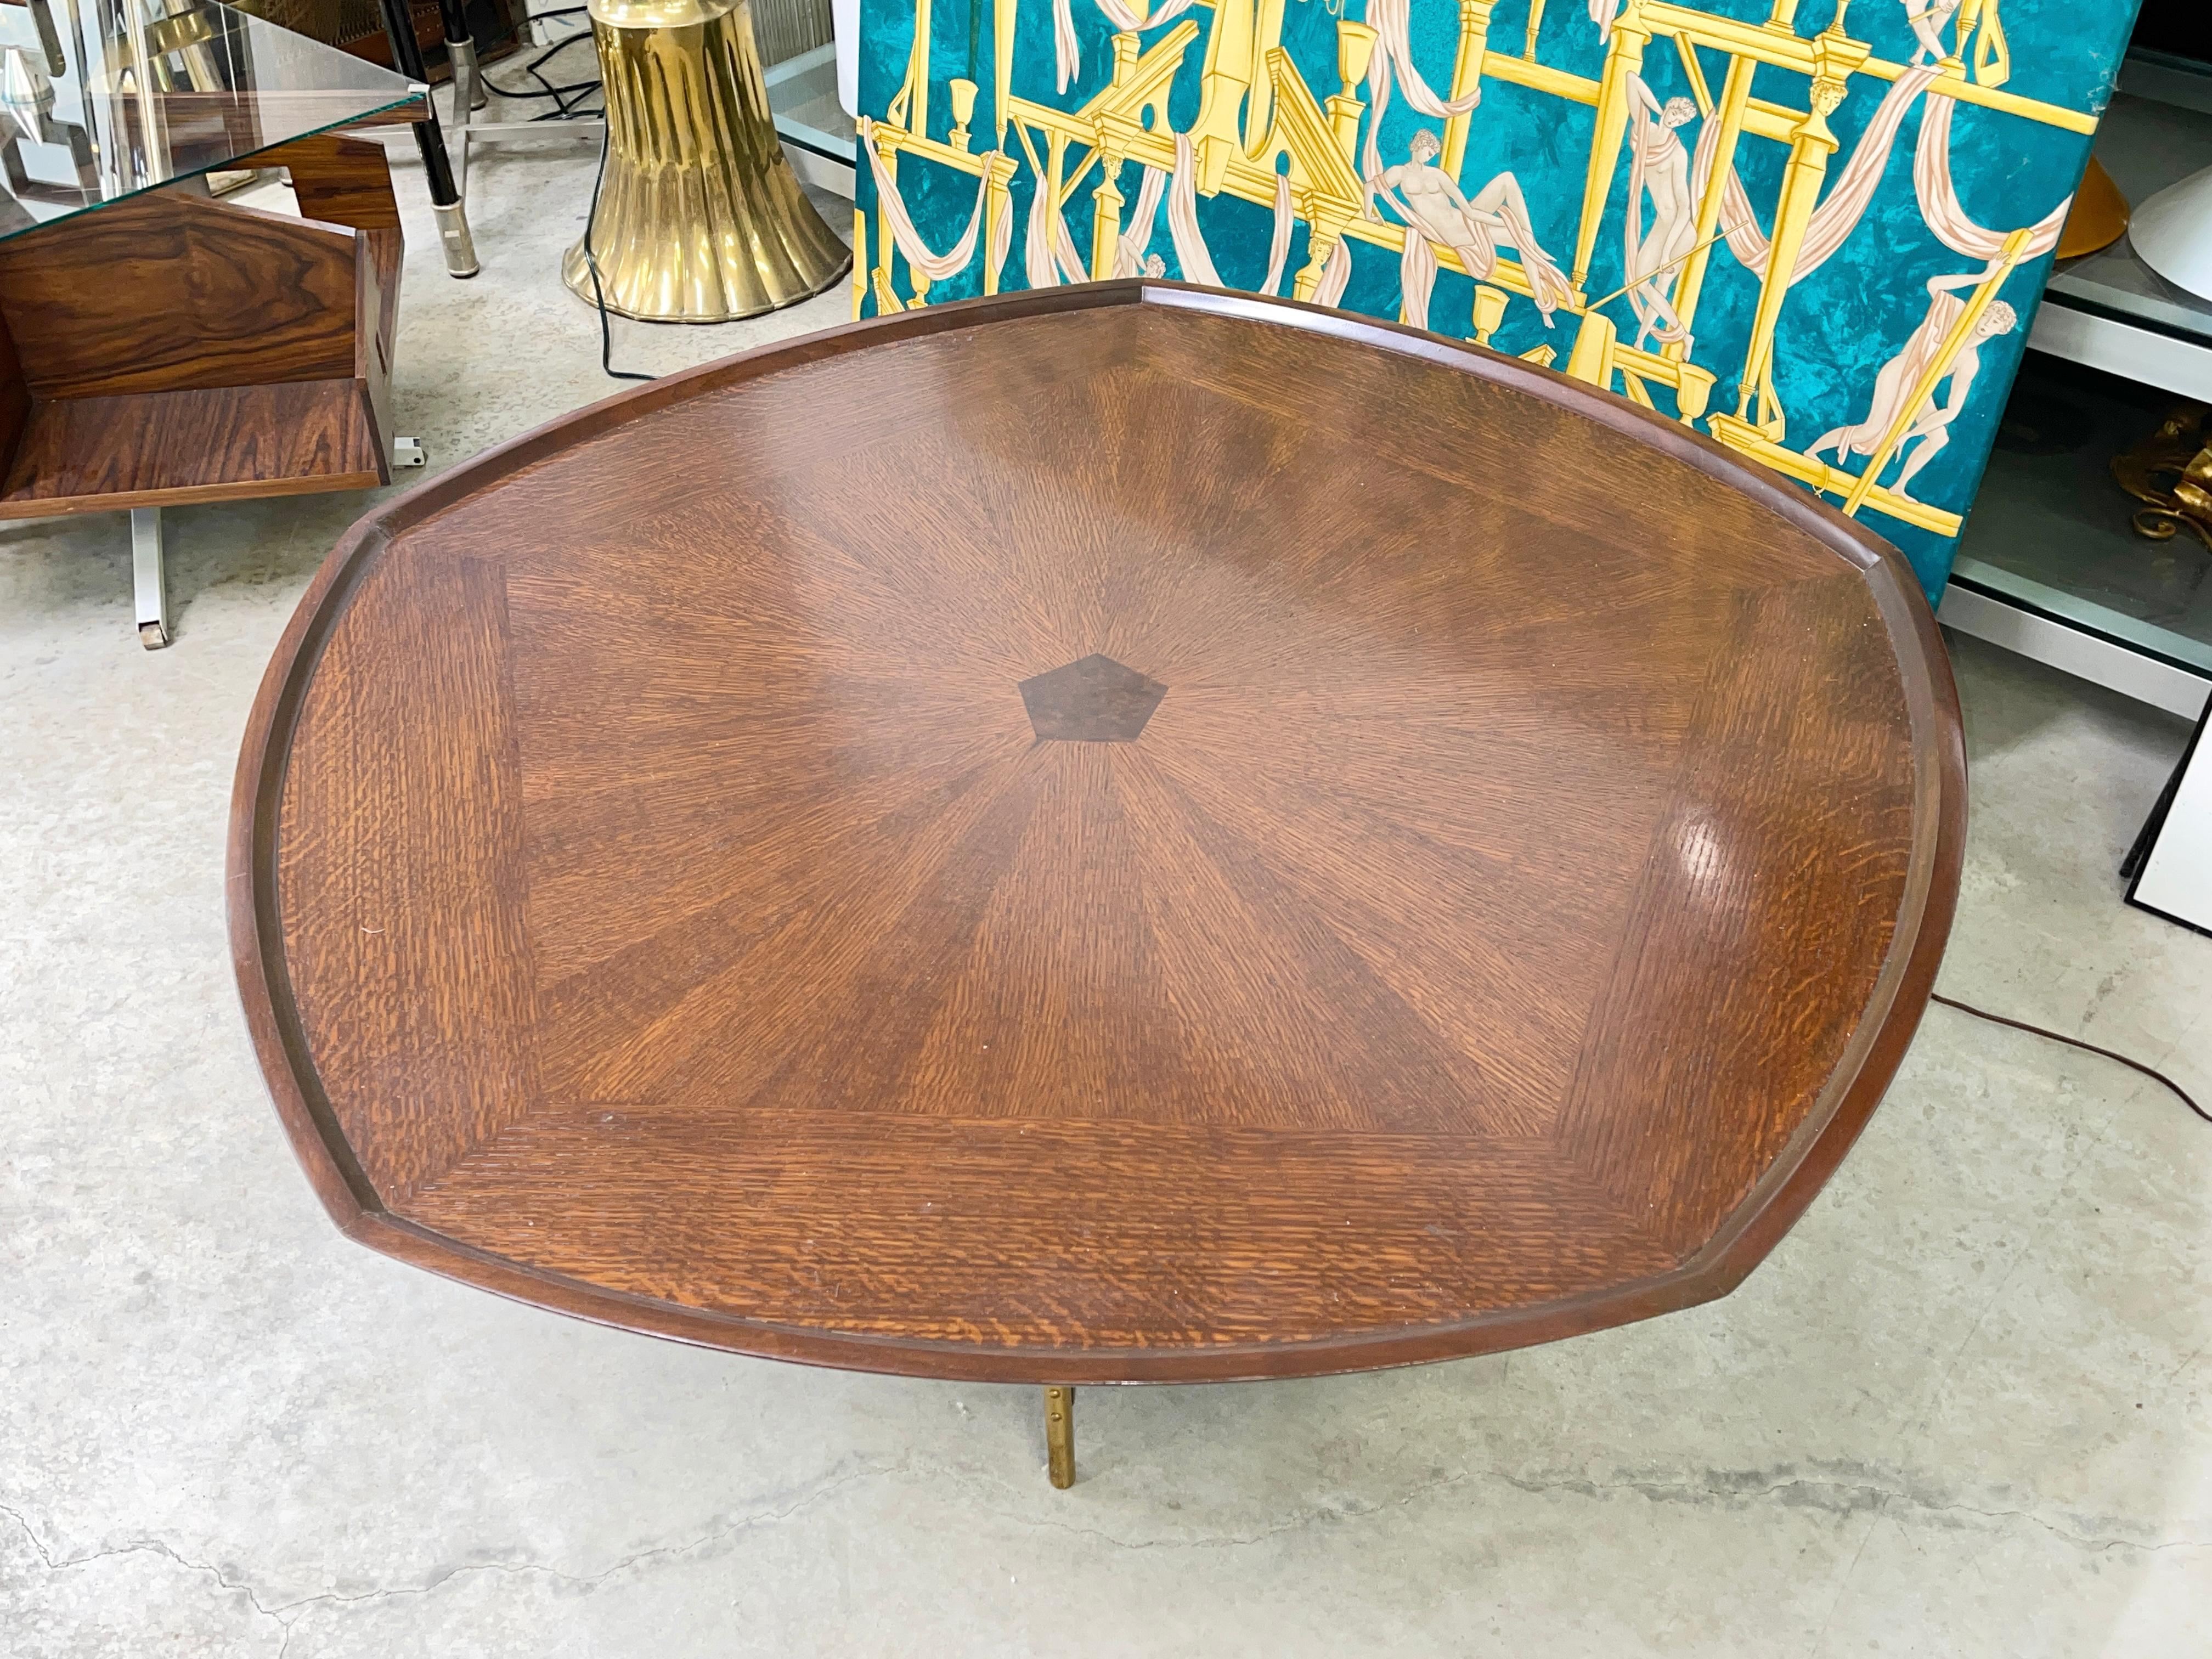 Very rare Mid-Century Modern large-scale pentagonal starburst coffee table designed by Paul Tuttle and Winsor White, circa 1960. 
This table was a limited edition production piece by Baker Furniture from the 